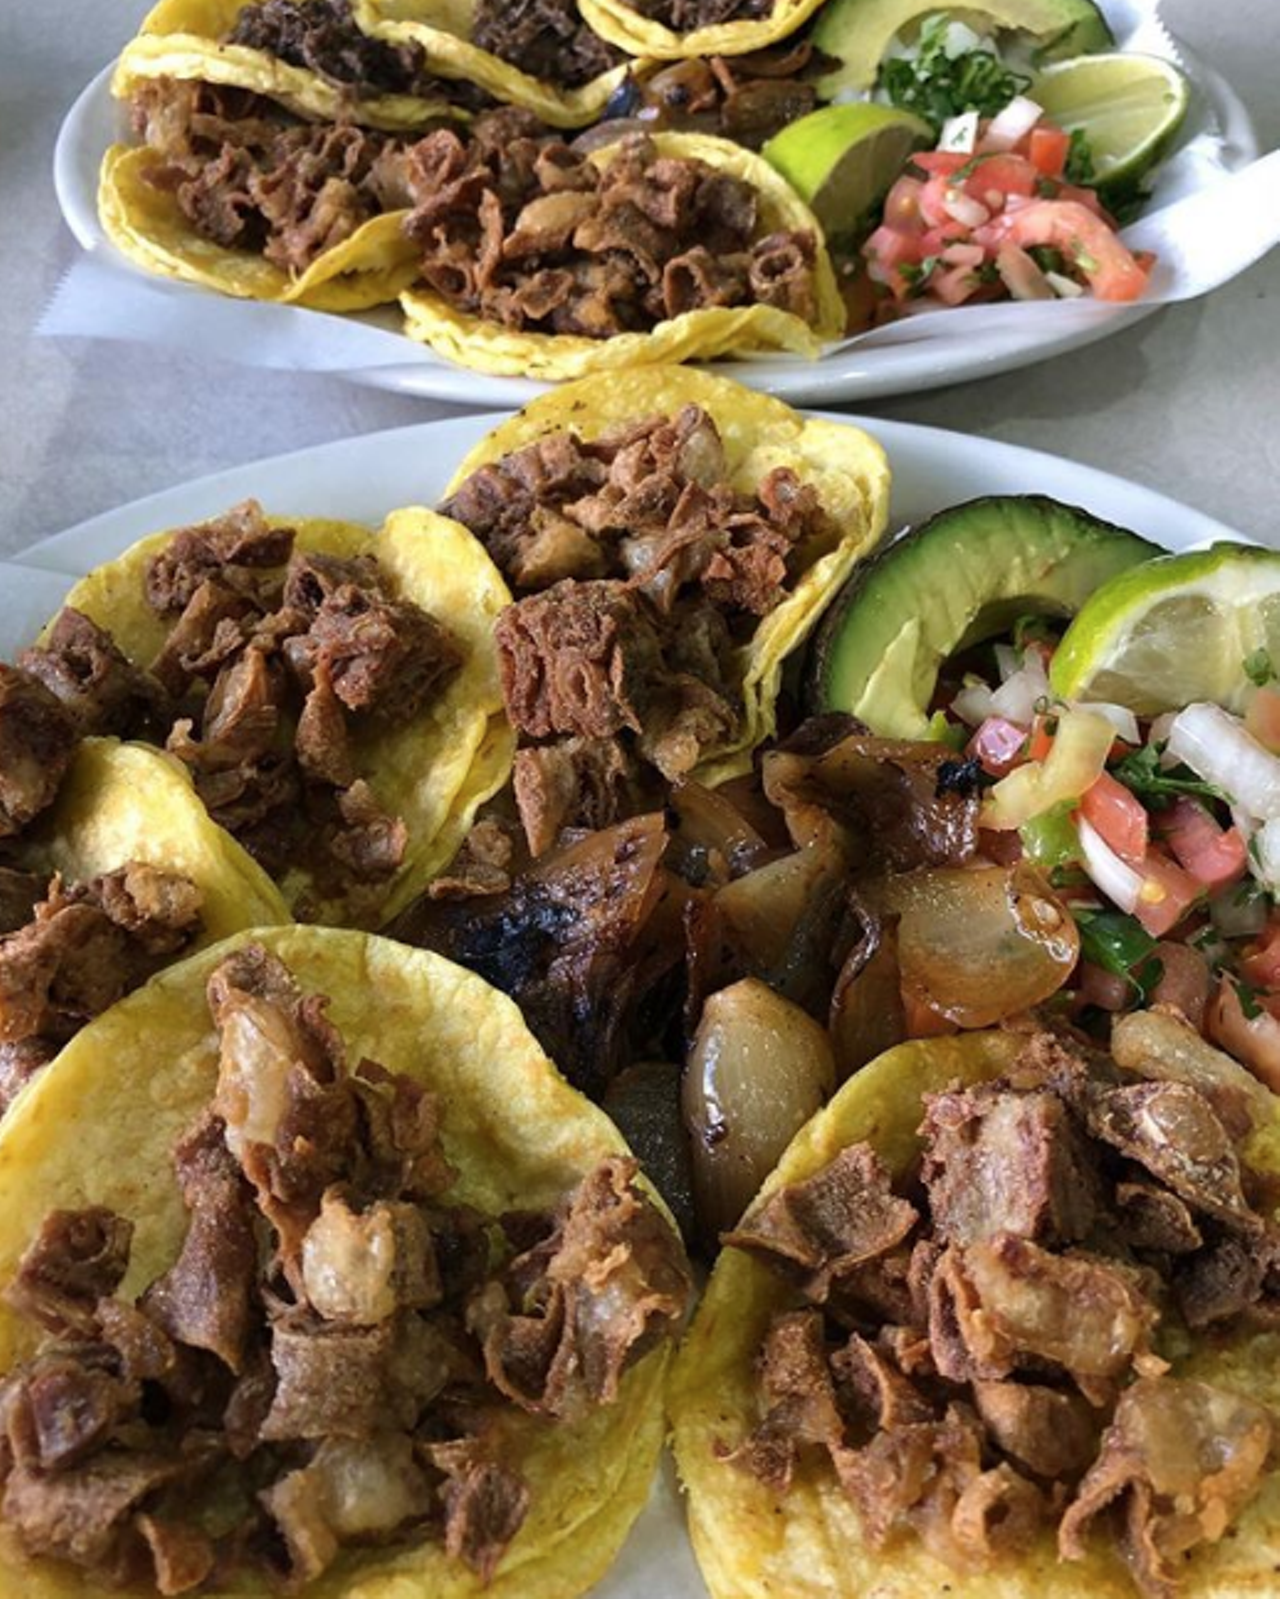 12. Taqueria Datapoint
4063 Medical Dr, (210) 615-3644
“This is an incredible taqueria that gives you an experience akin to those in Mexico. Try the trompo and barbacoa mini tacos. Honestly try one of each then order more of your favorite” – Manuel L.
Photo via Instagram / satx_foodies